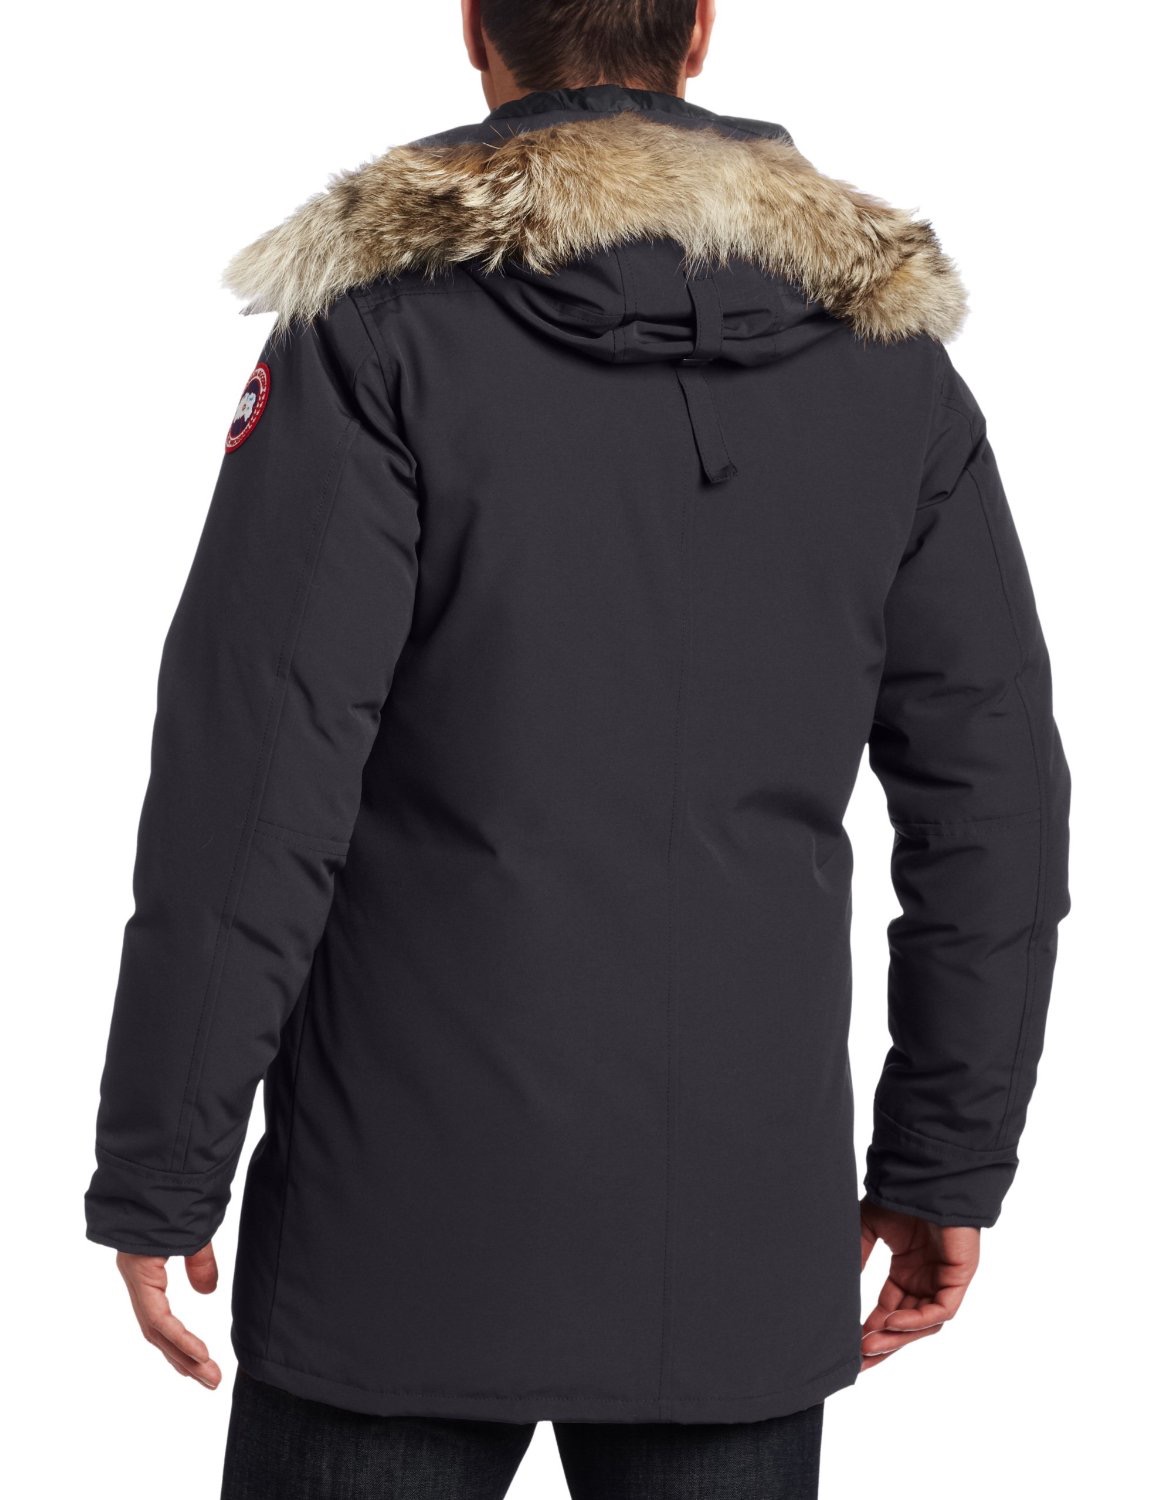 Canada Goose langford parka replica discounts - My Thoughts on Fur and the Irresponsible Plague of Canada Goose ...